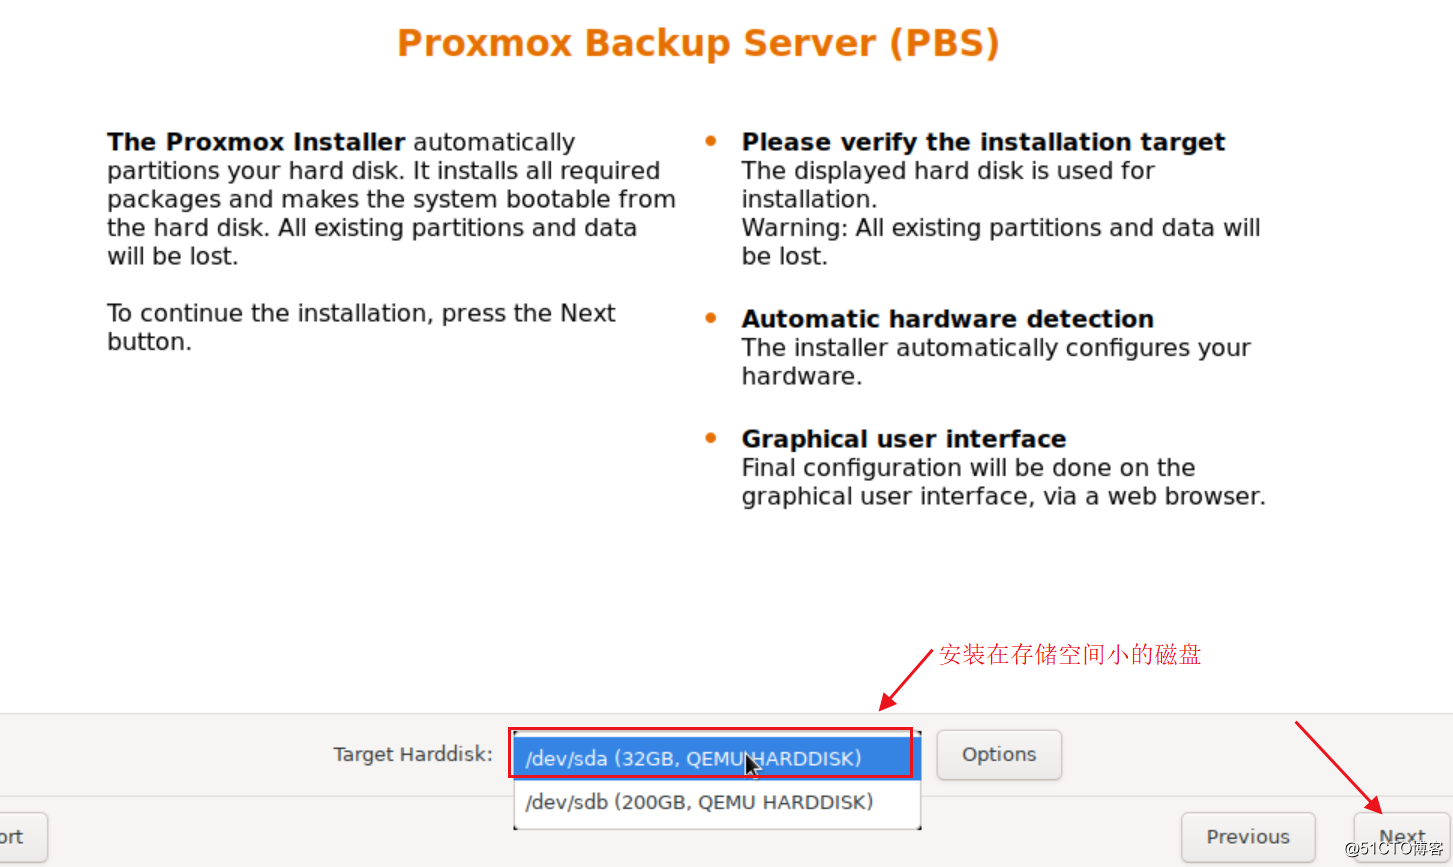 PBS (proxmox backup server) early adopters